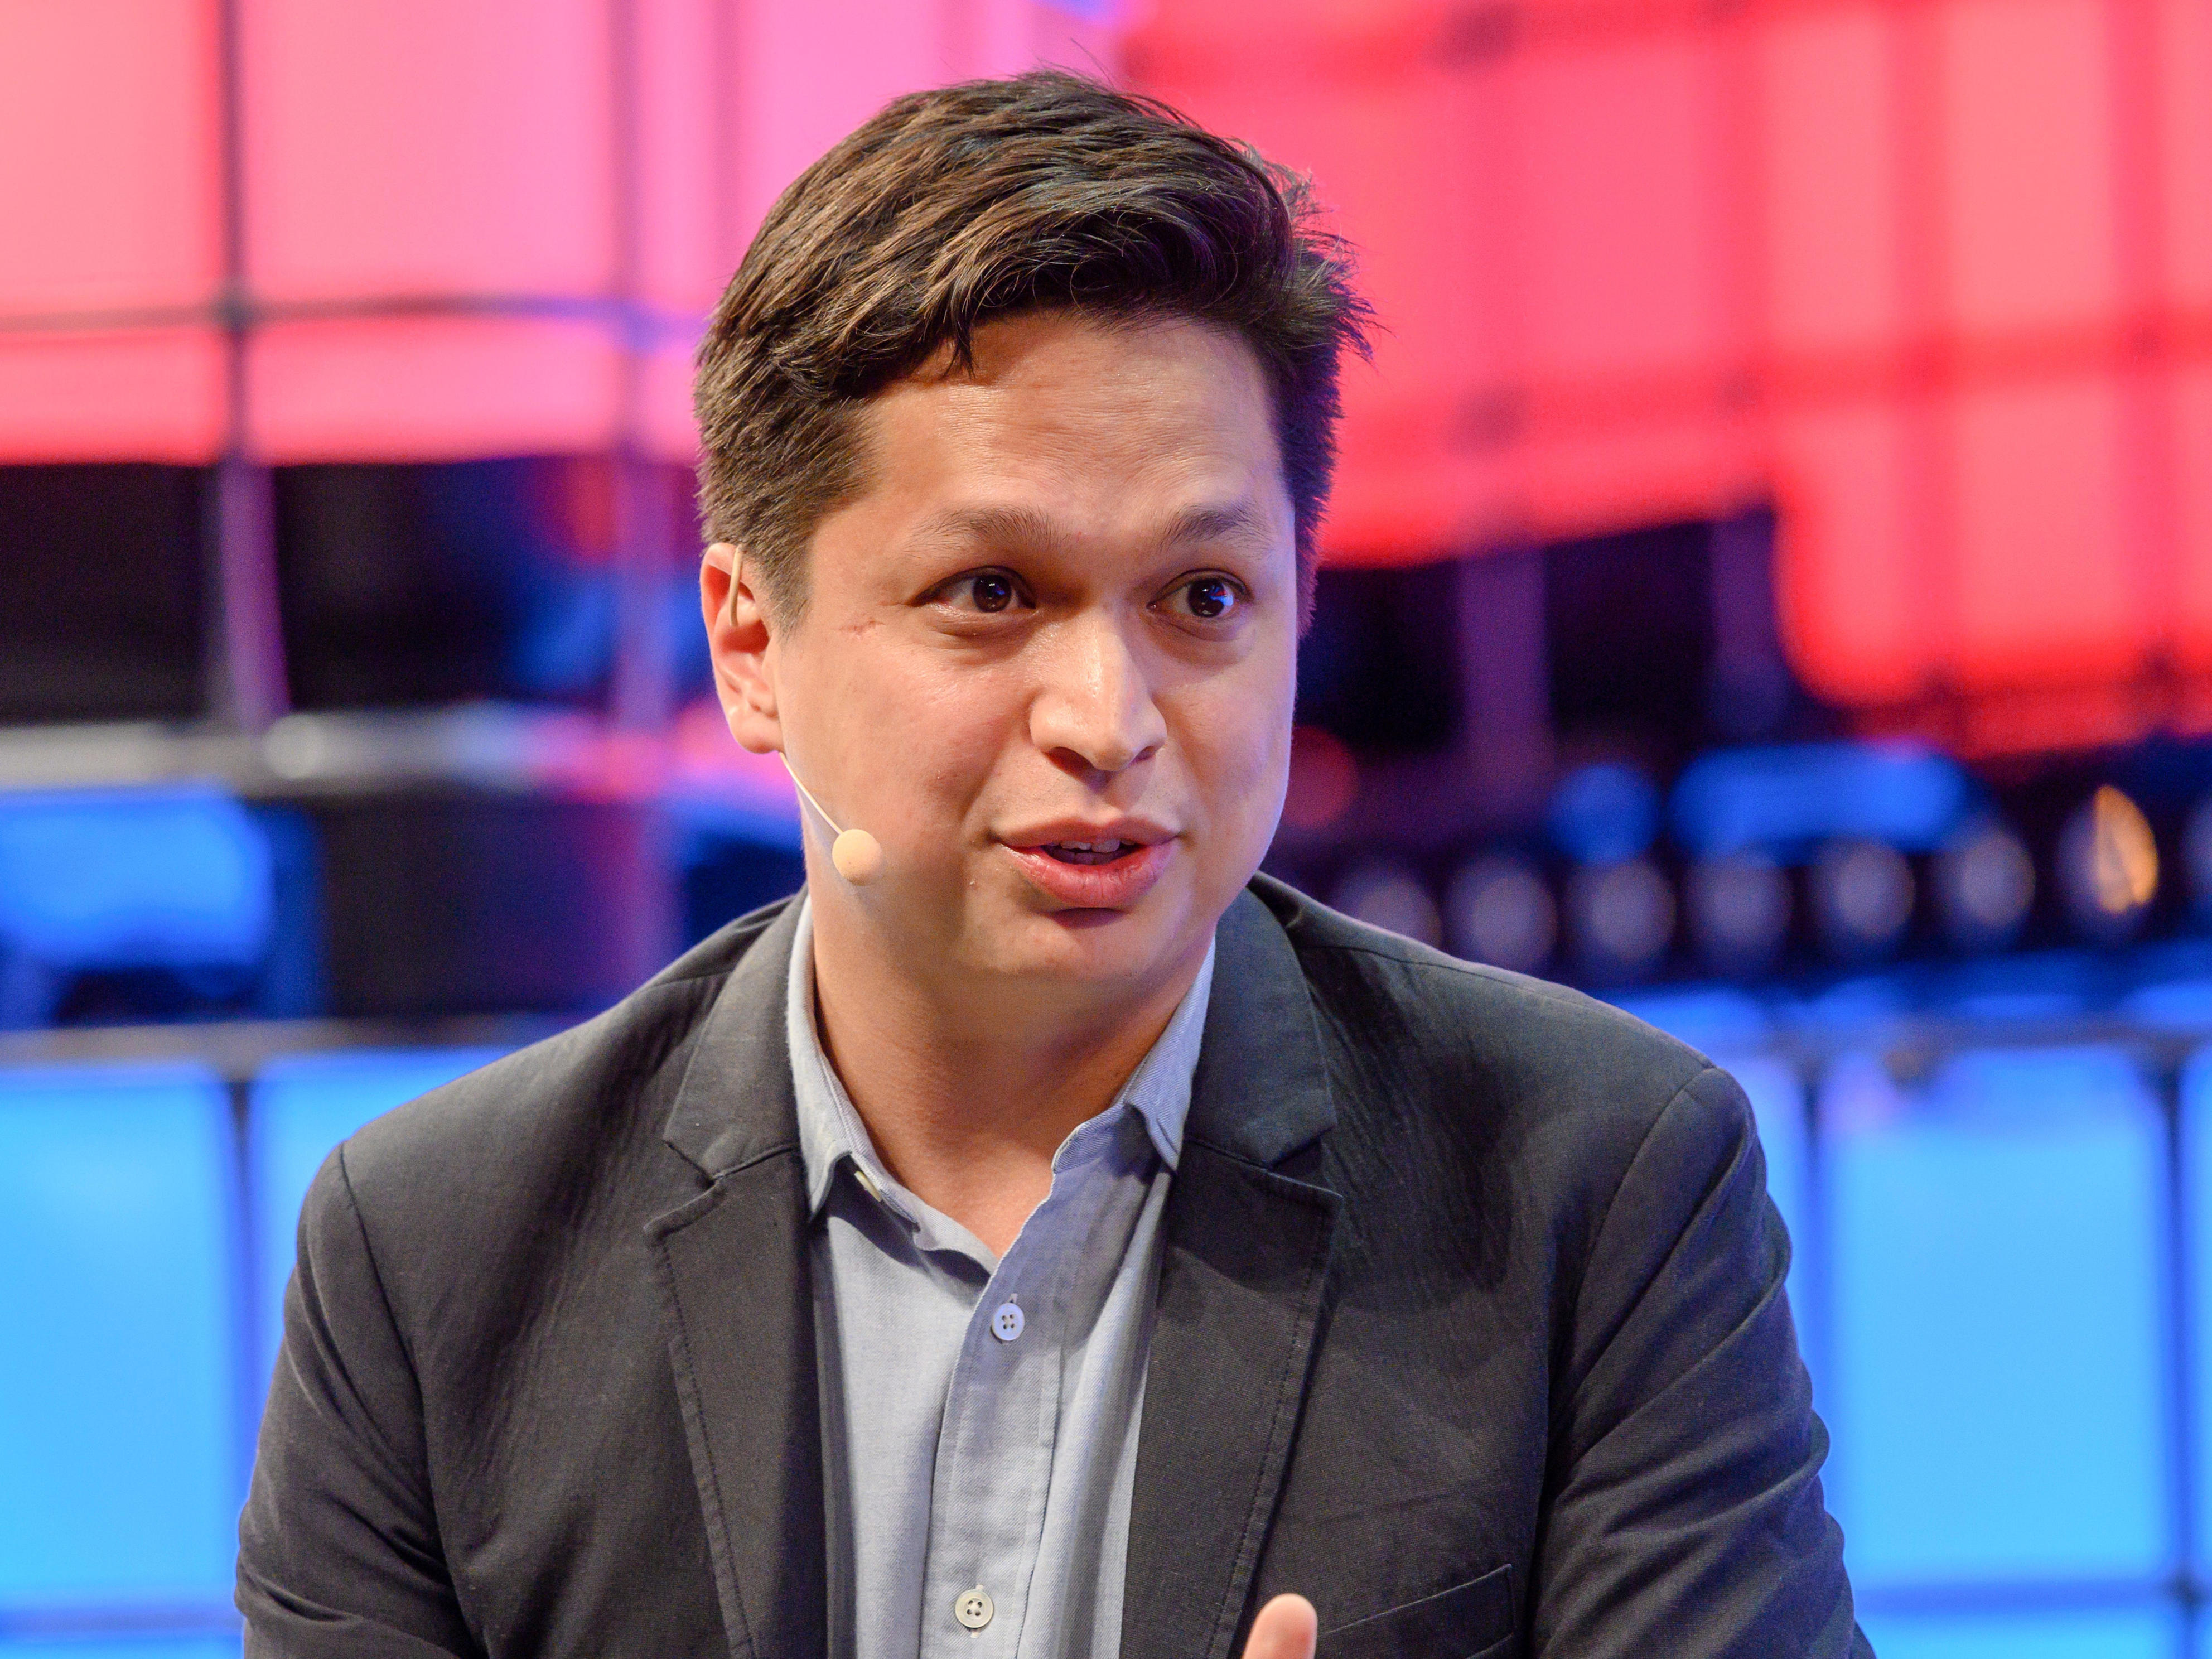 In late June, Pinterest announced that co-founder Ben Silbermann would transition to a new role as executive chairman. Former Google executive and former Venmo CEO Bill Ready has taken over Pinterest's top job.